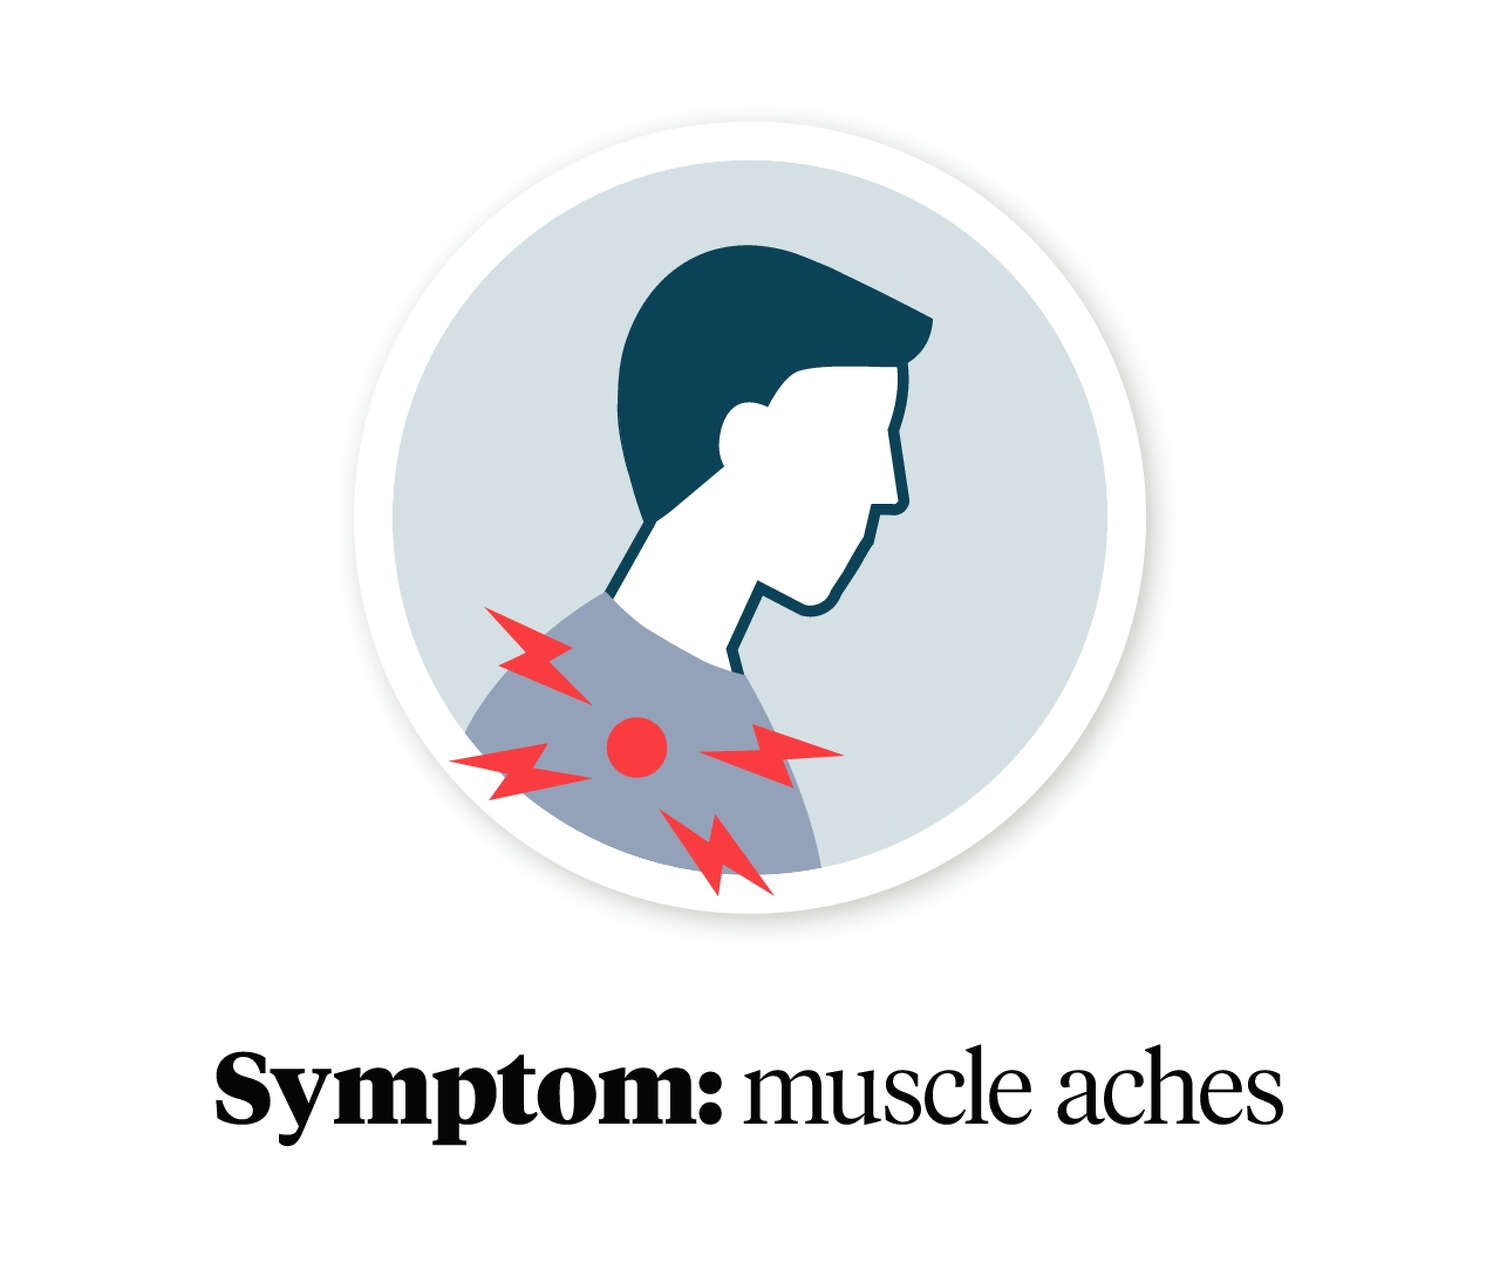 Graphic showing a person with muscle aches